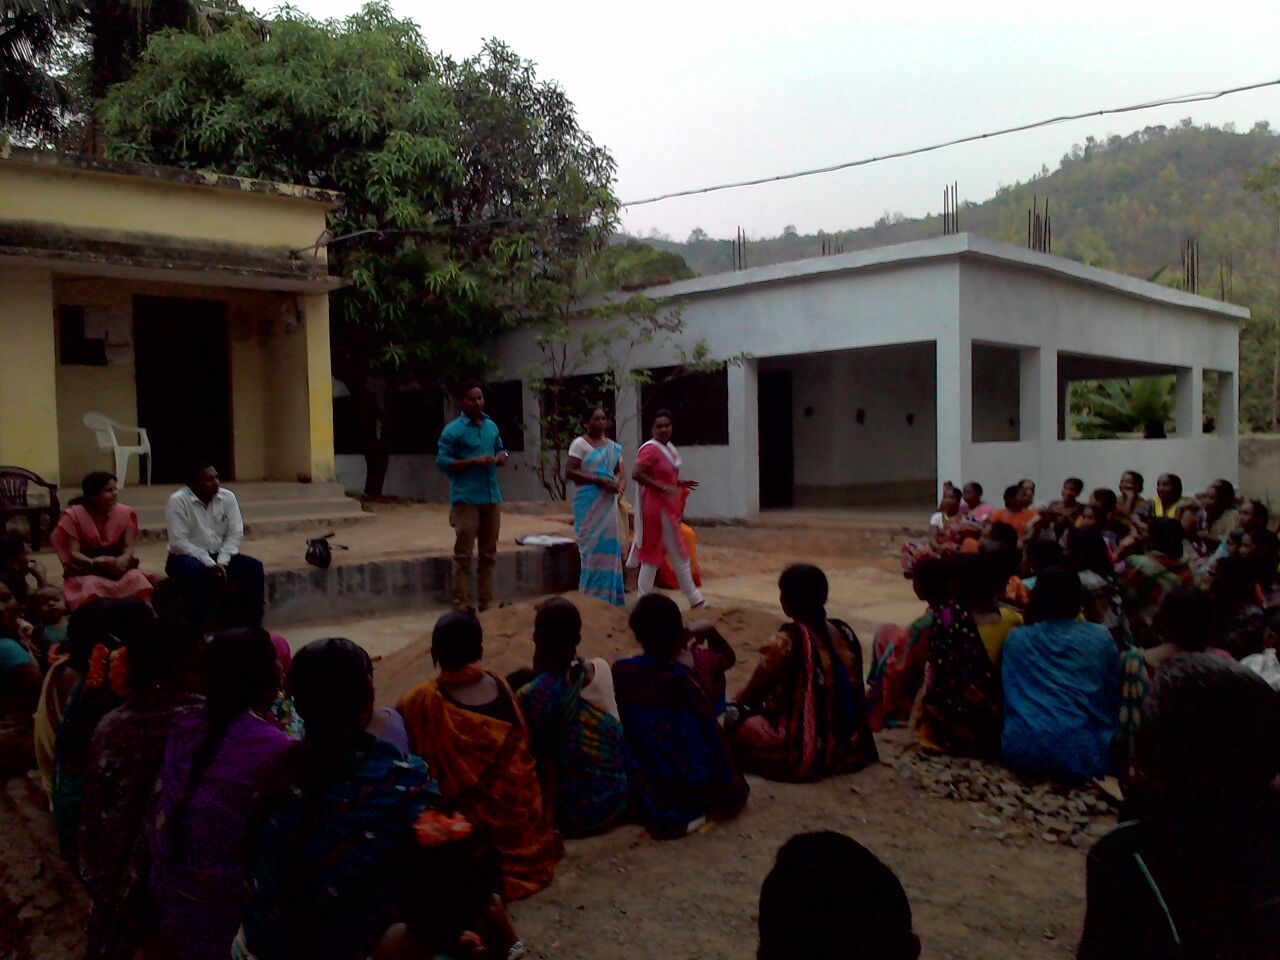 An evening meeting with villagers as most people work during the day 